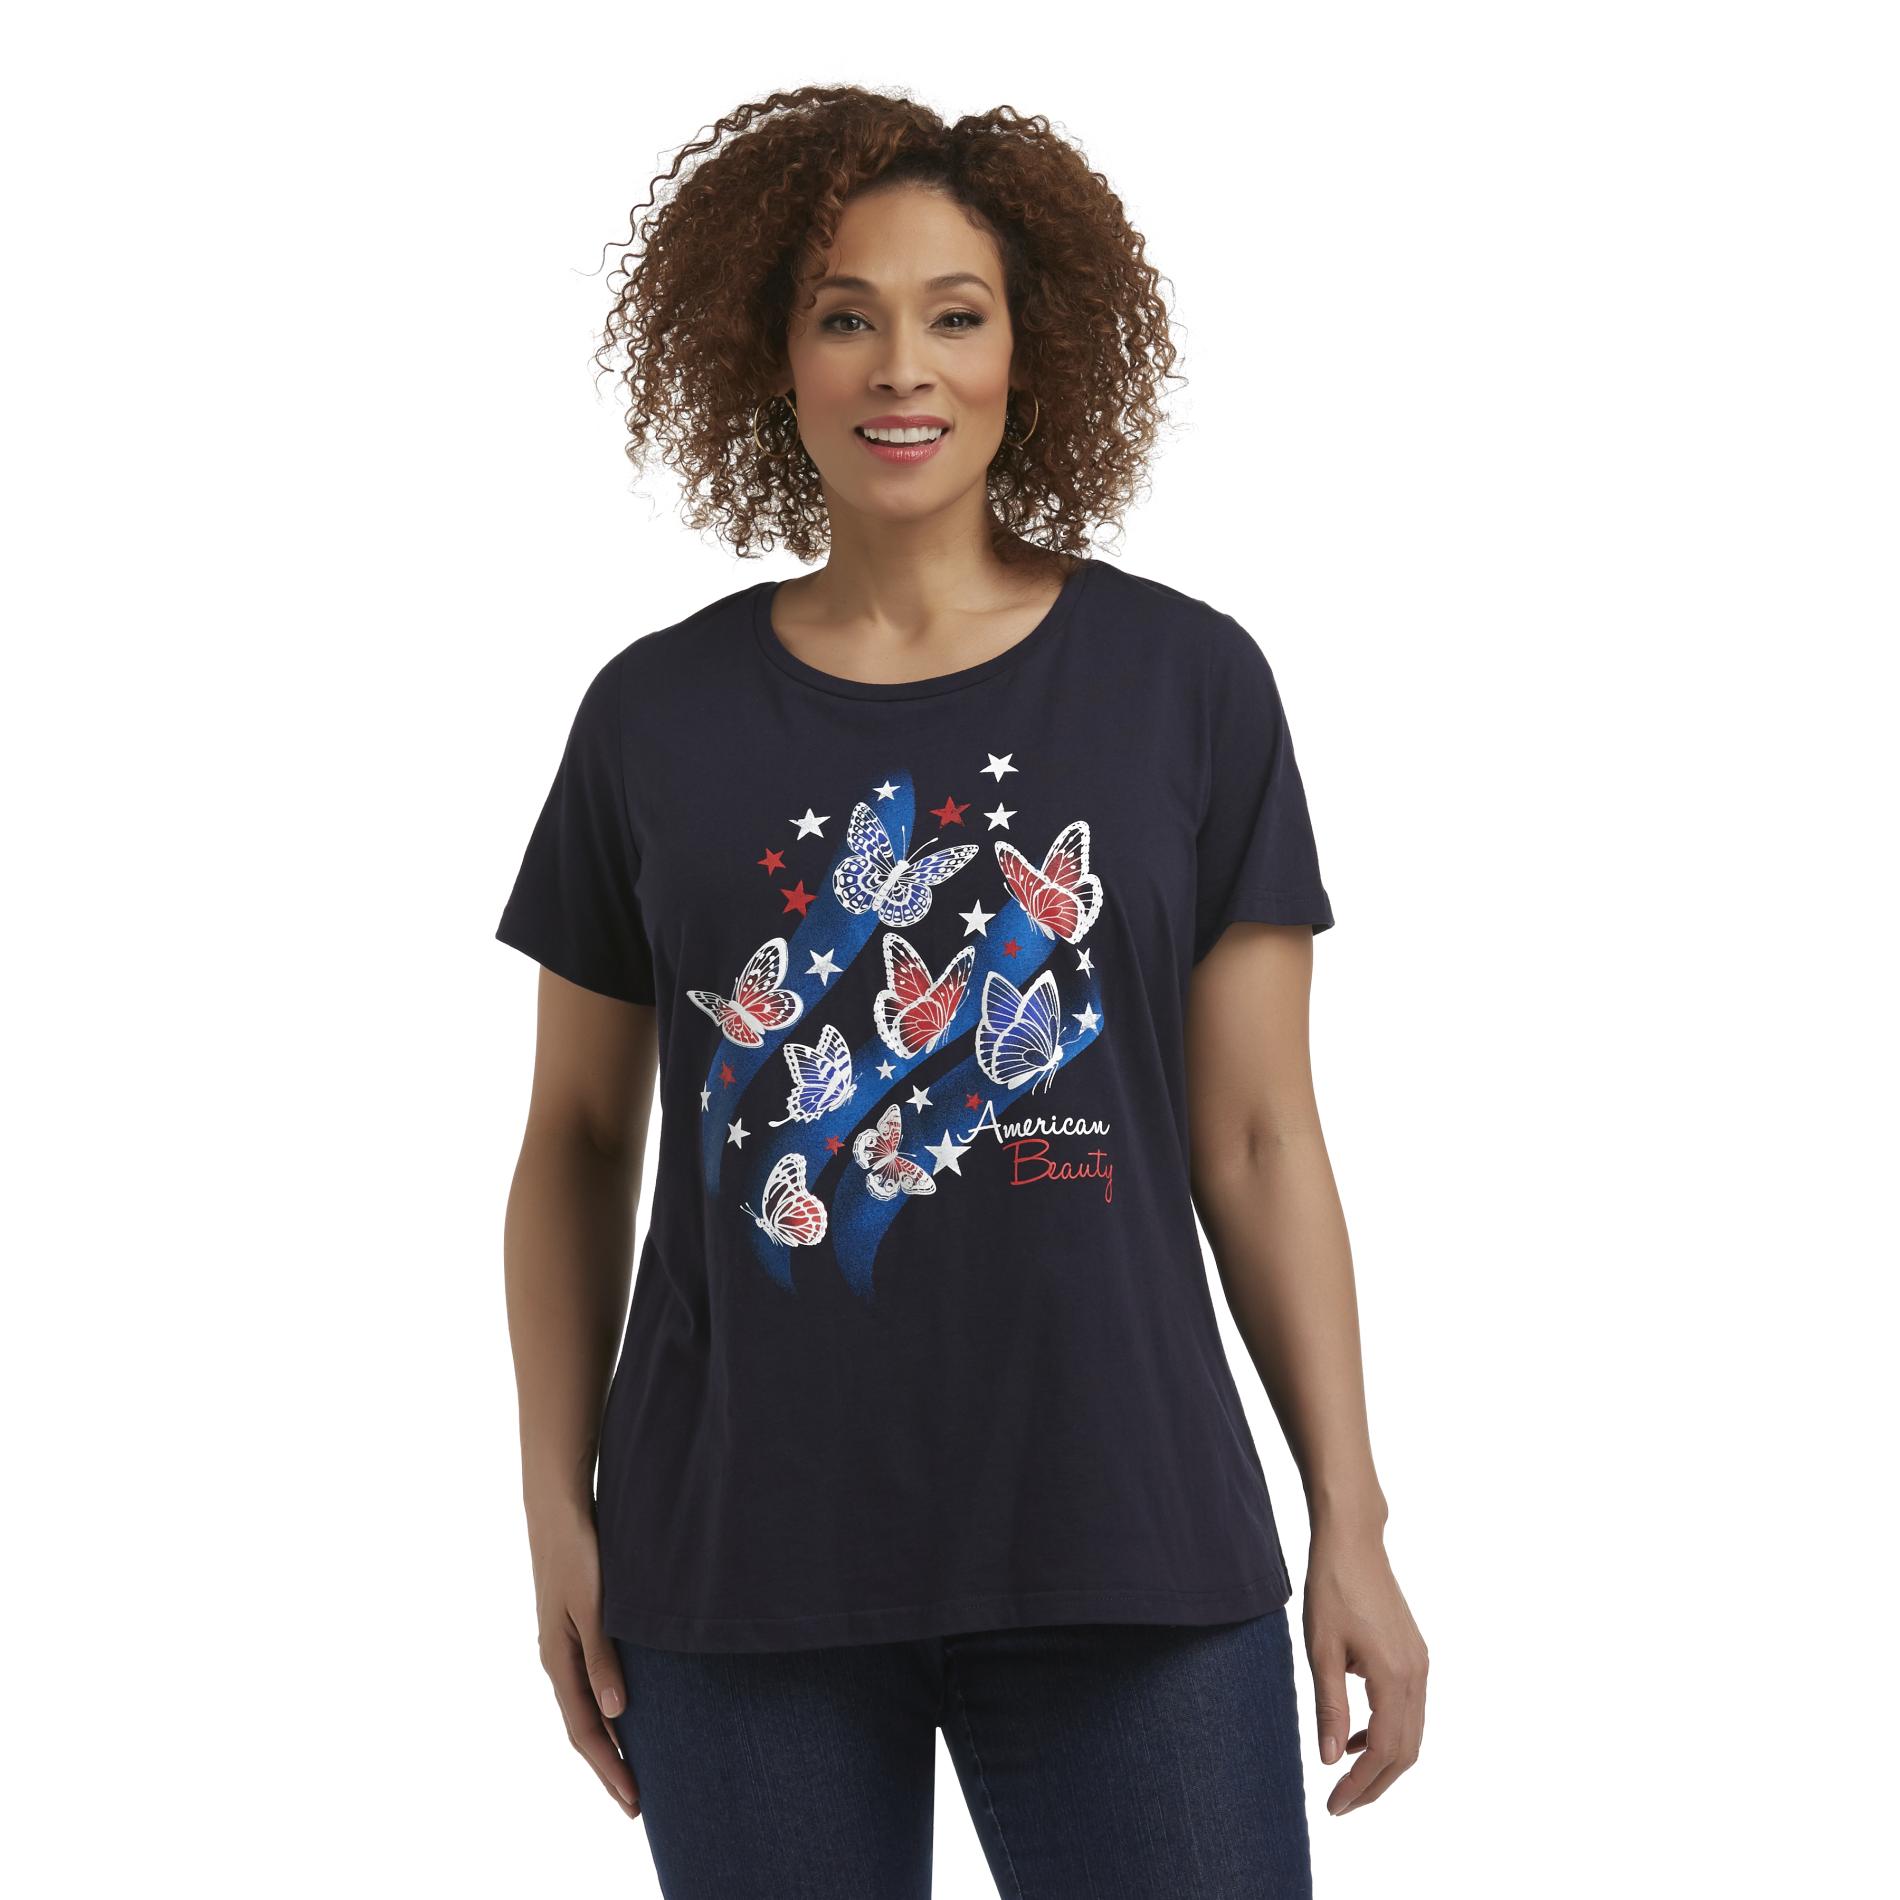 Holiday Editions Women's Plus Graphic T-Shirt - American Beauty